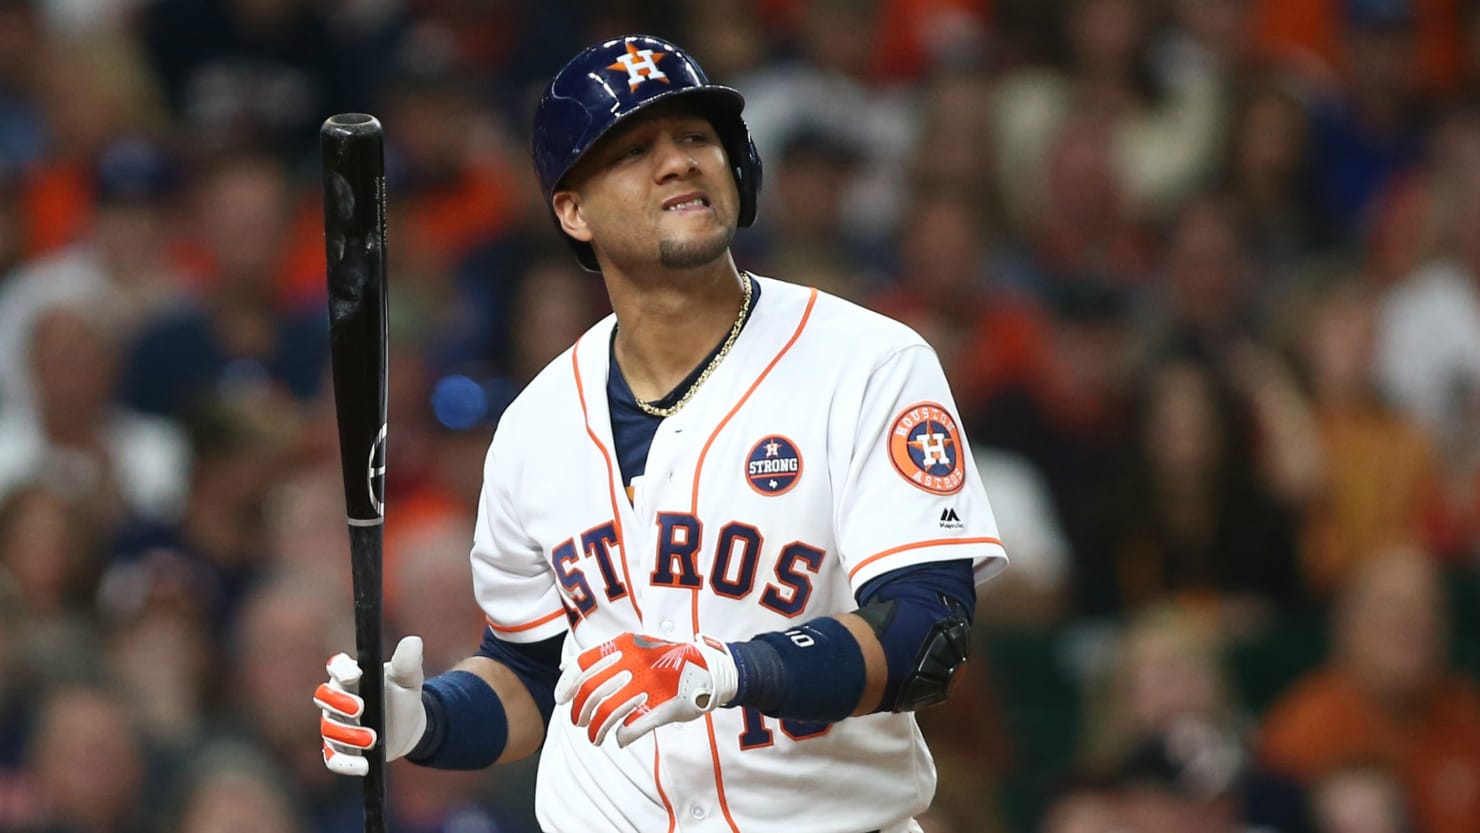 Yuli Gurriel apologizes for racial gesture directed at Yu Darvish